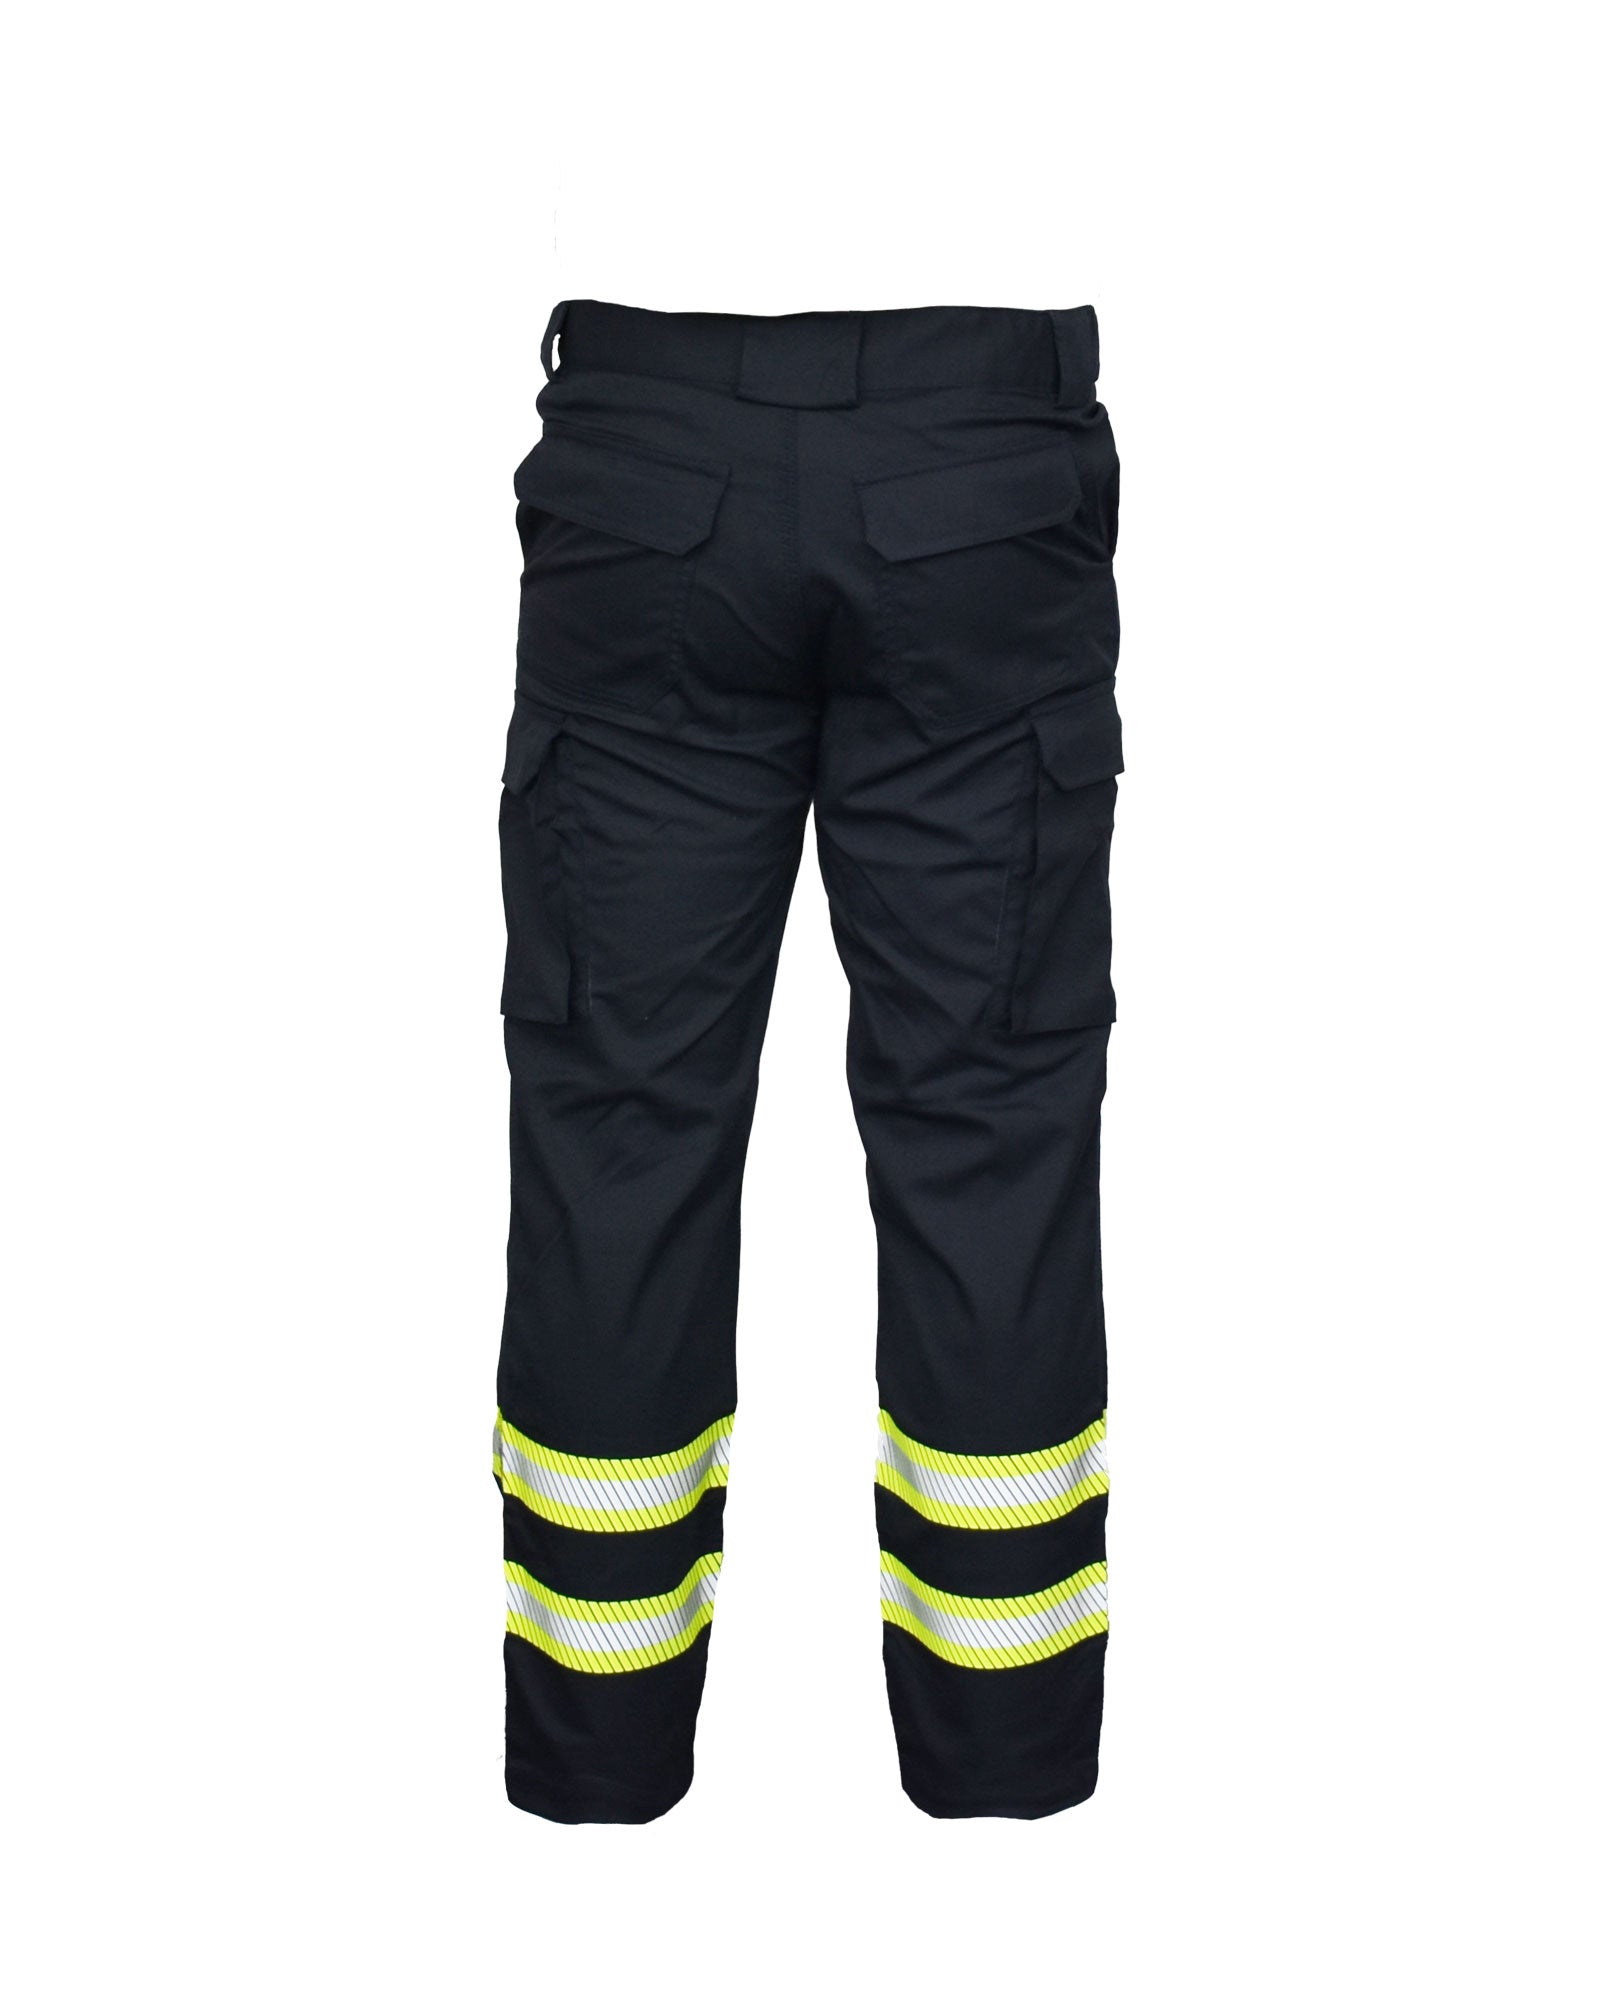 Cargo Firefighter Pants - Nomex -50040489